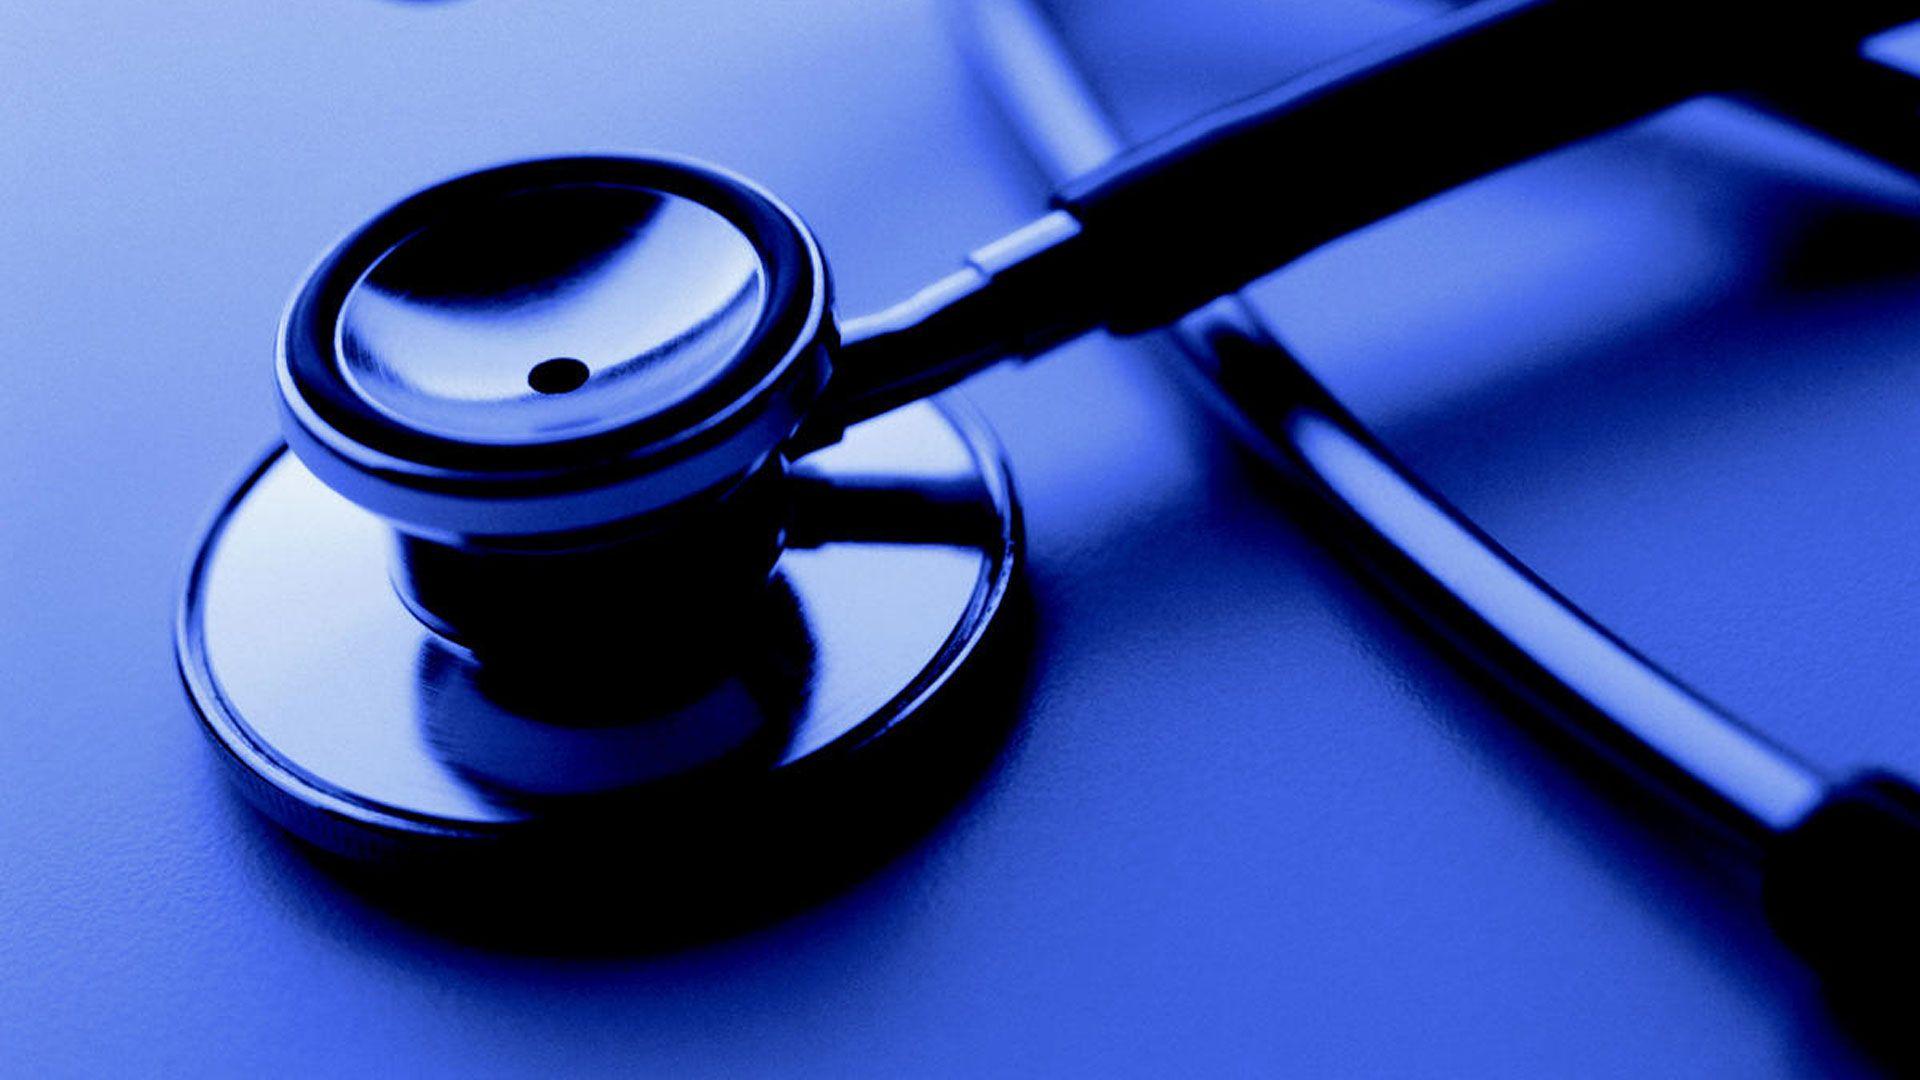 Stethoscope Wallpaper (Picture)